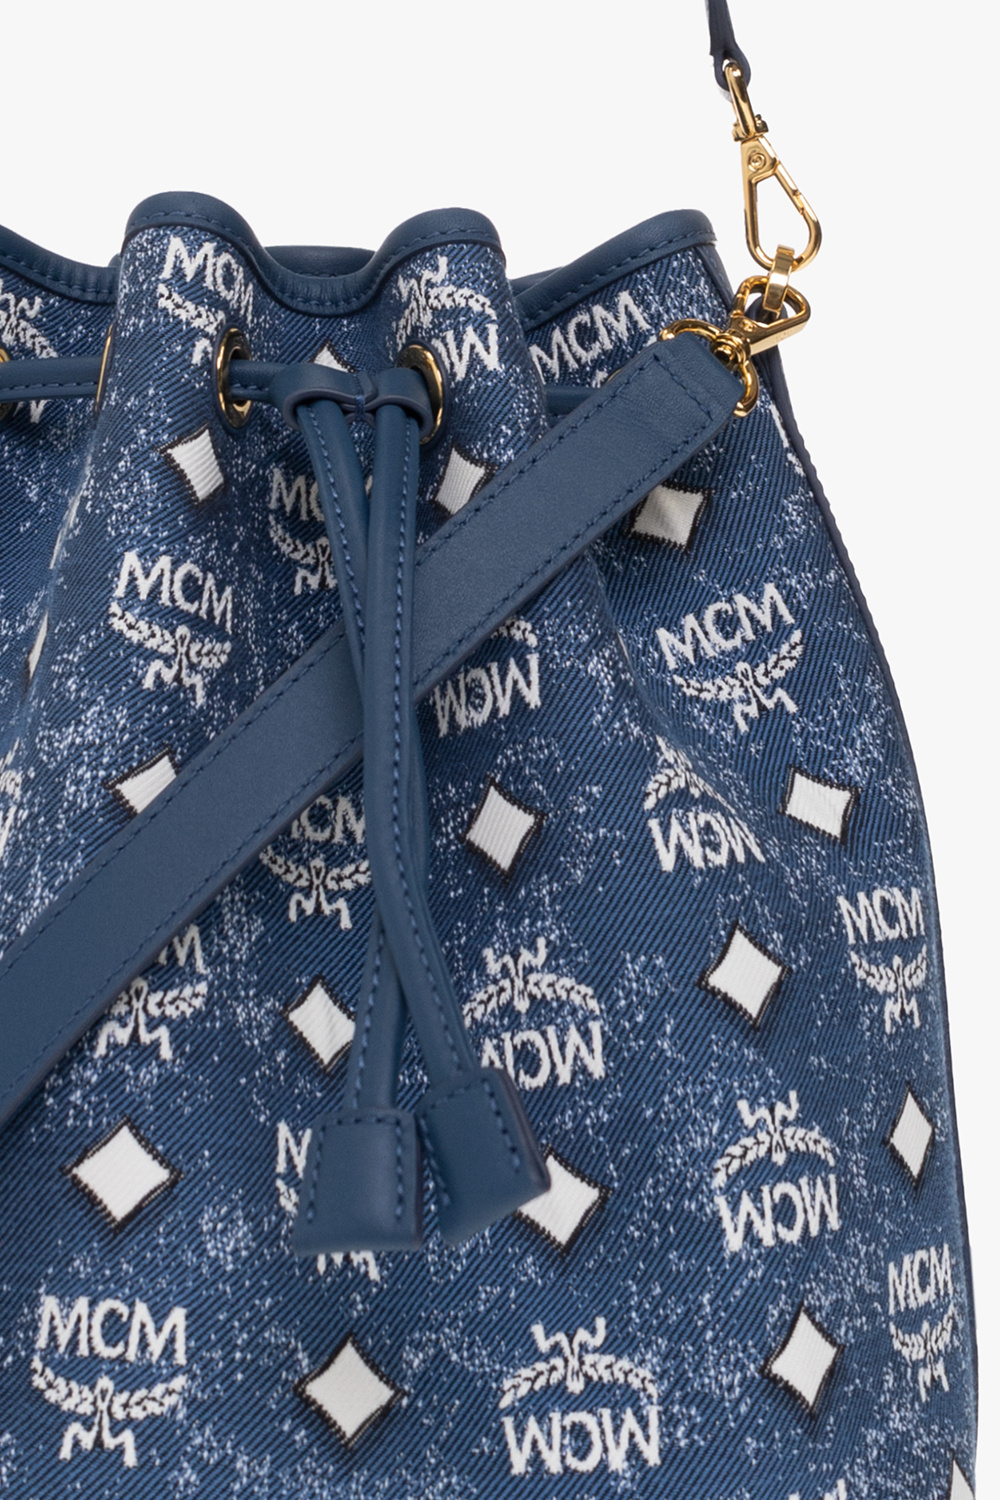 Louis vuitton man's jacket - clothing & accessories - by owner - apparel  sale - craigslist